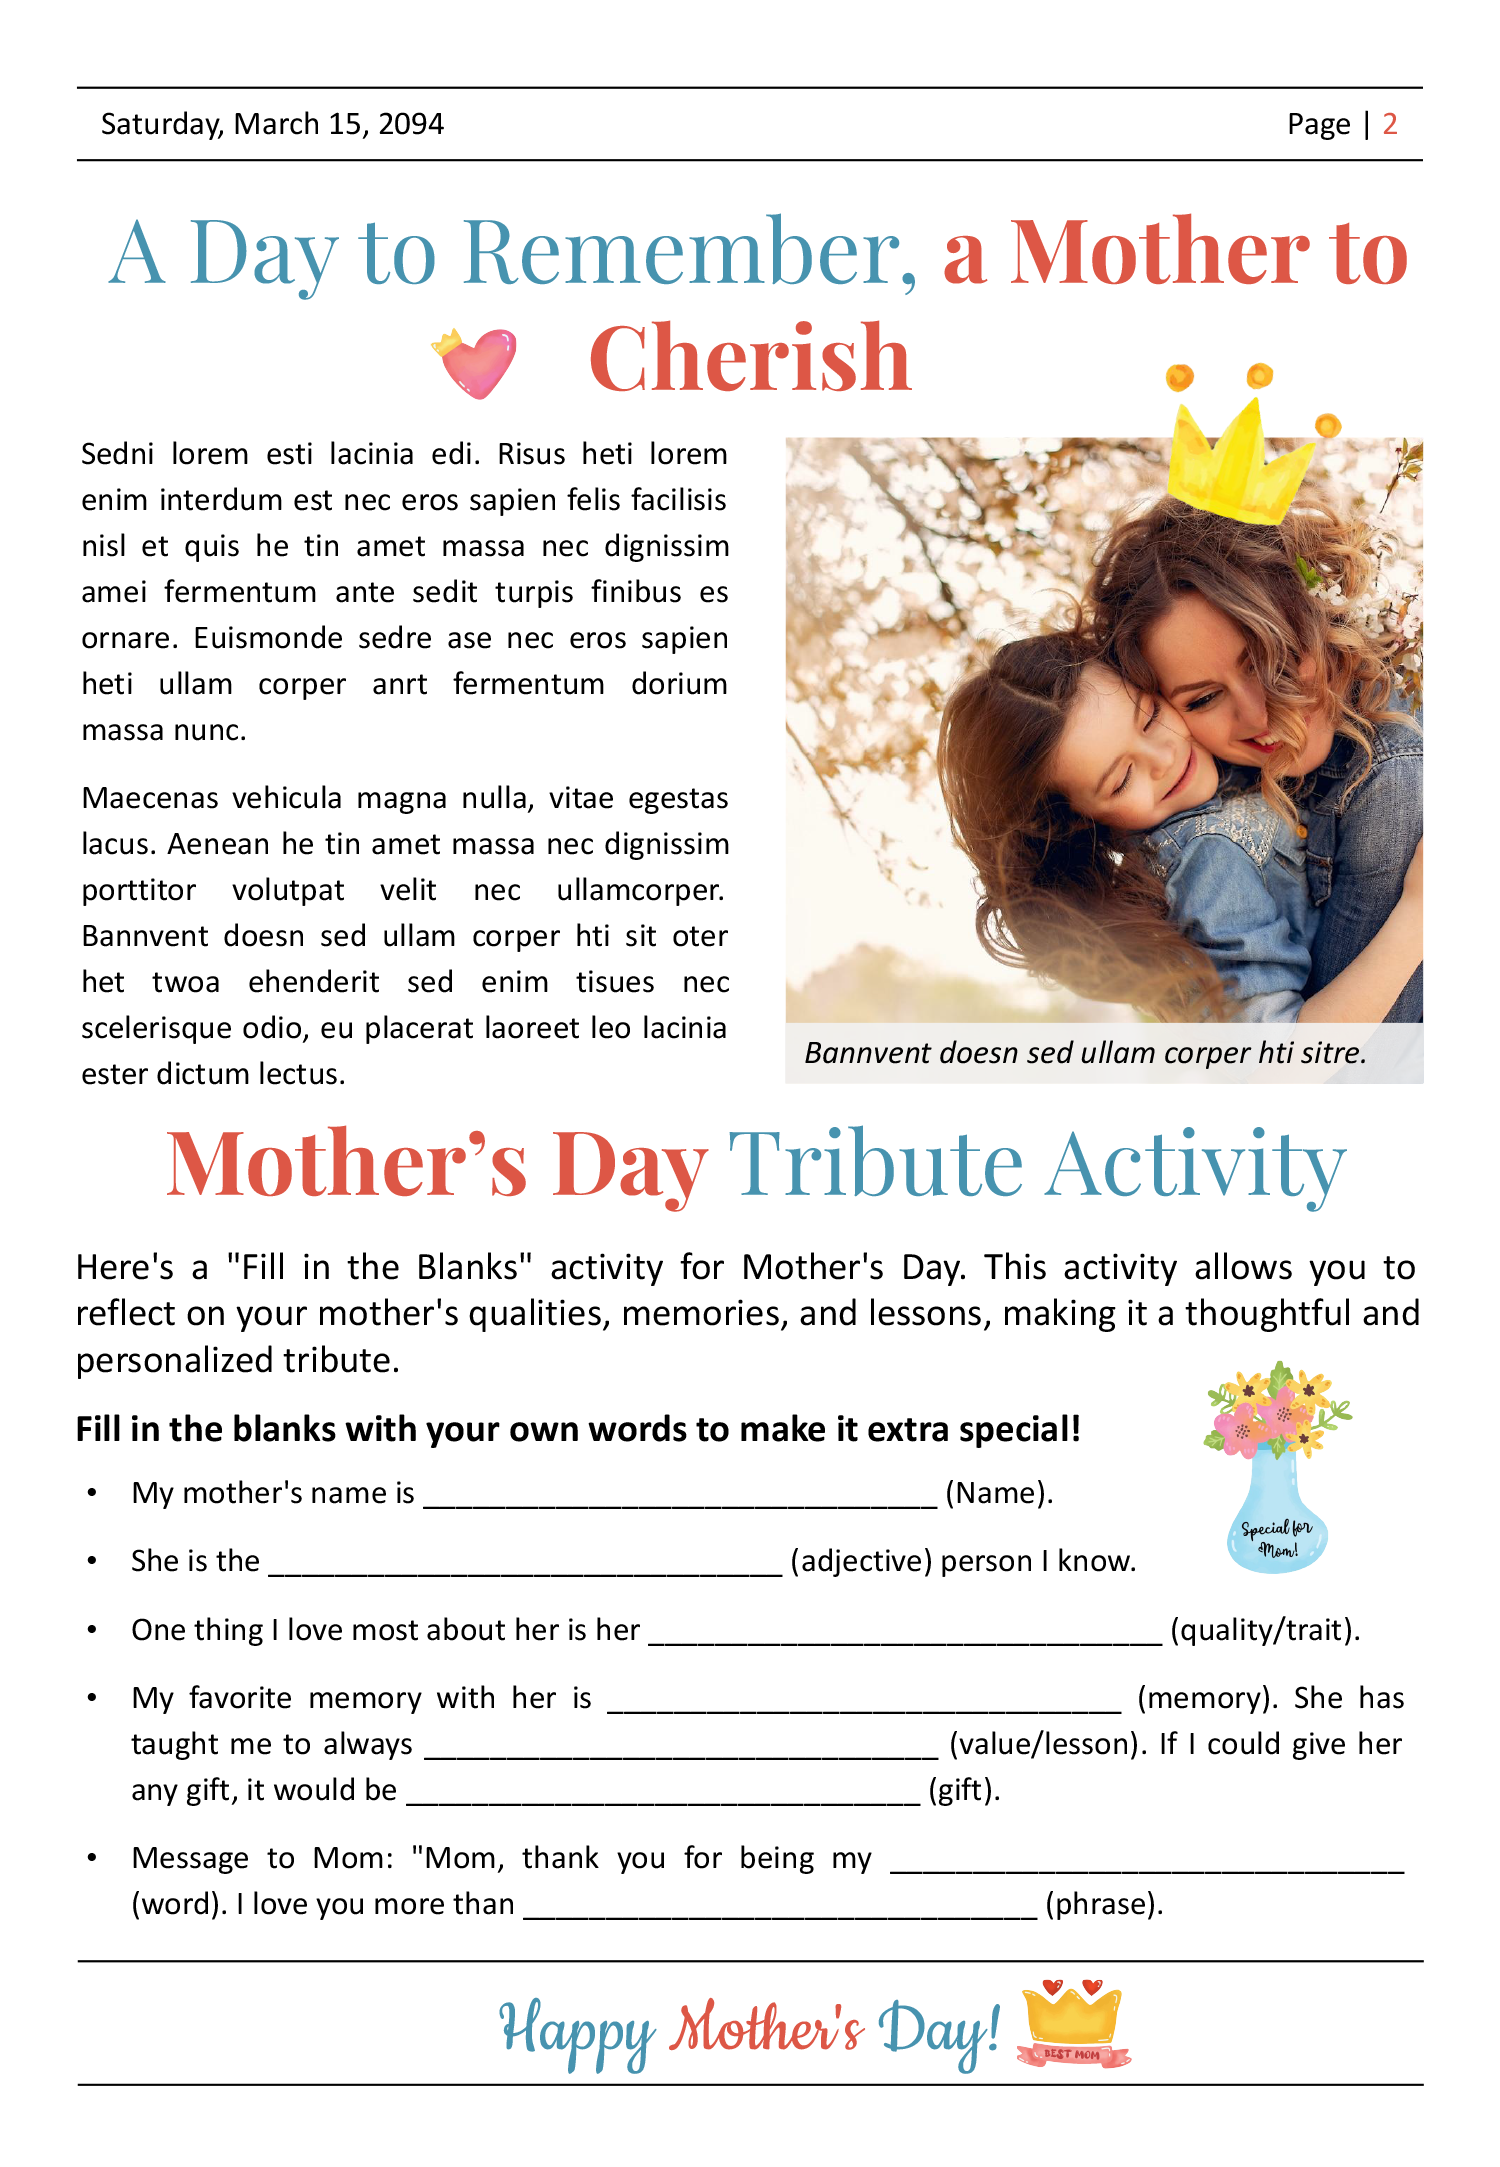 Mother's Day Celebration Newspaper Template - Page 02